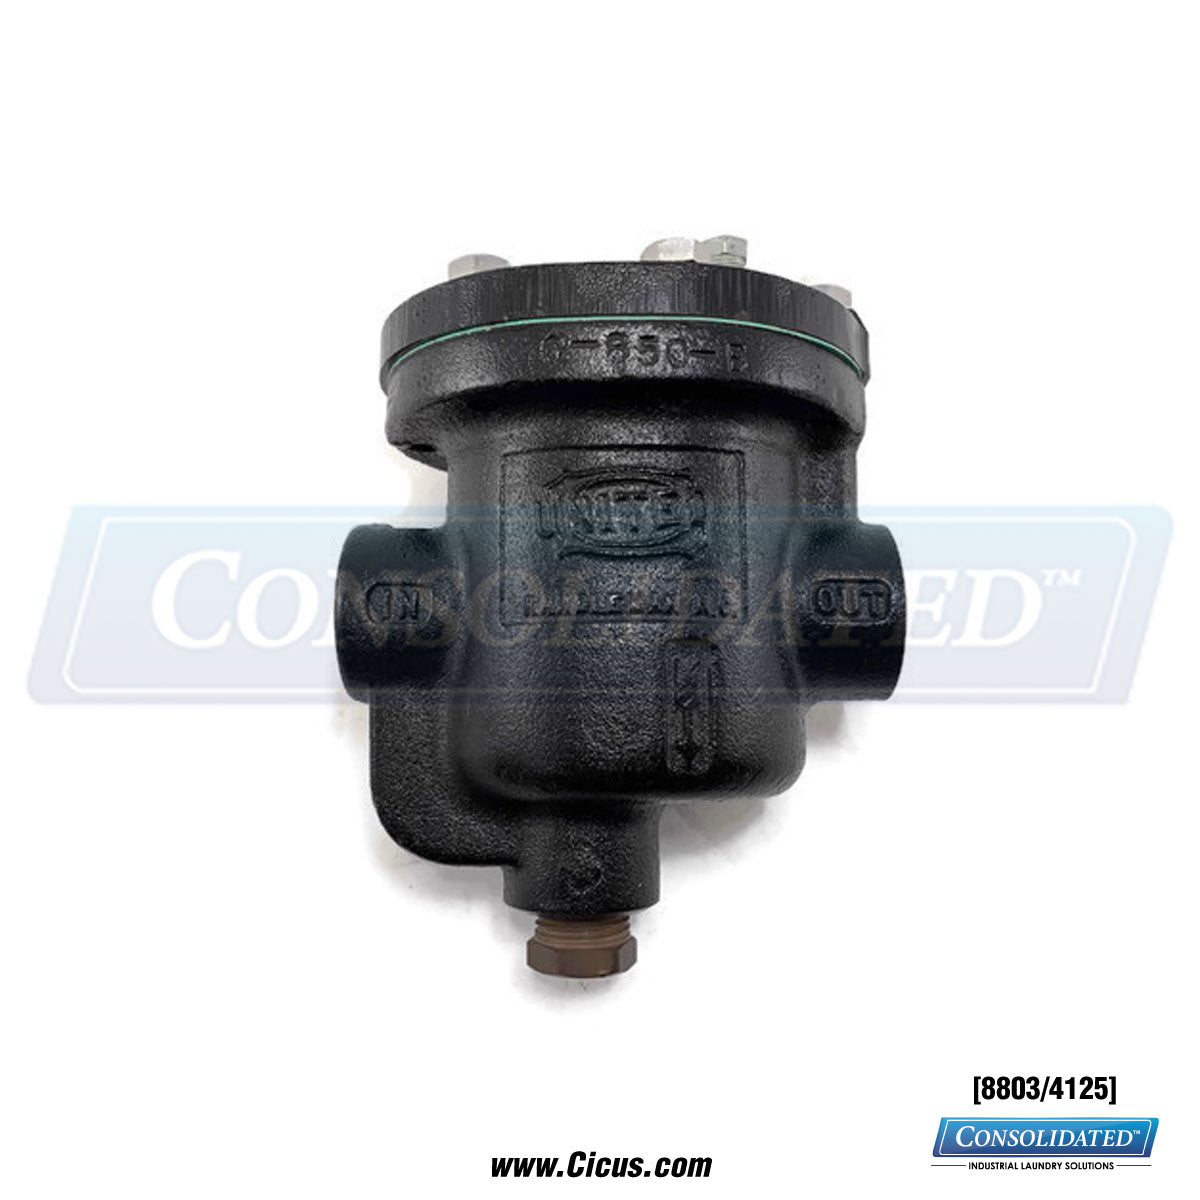 Armstrong 880 Steam Trap [8803/4125] - Side View